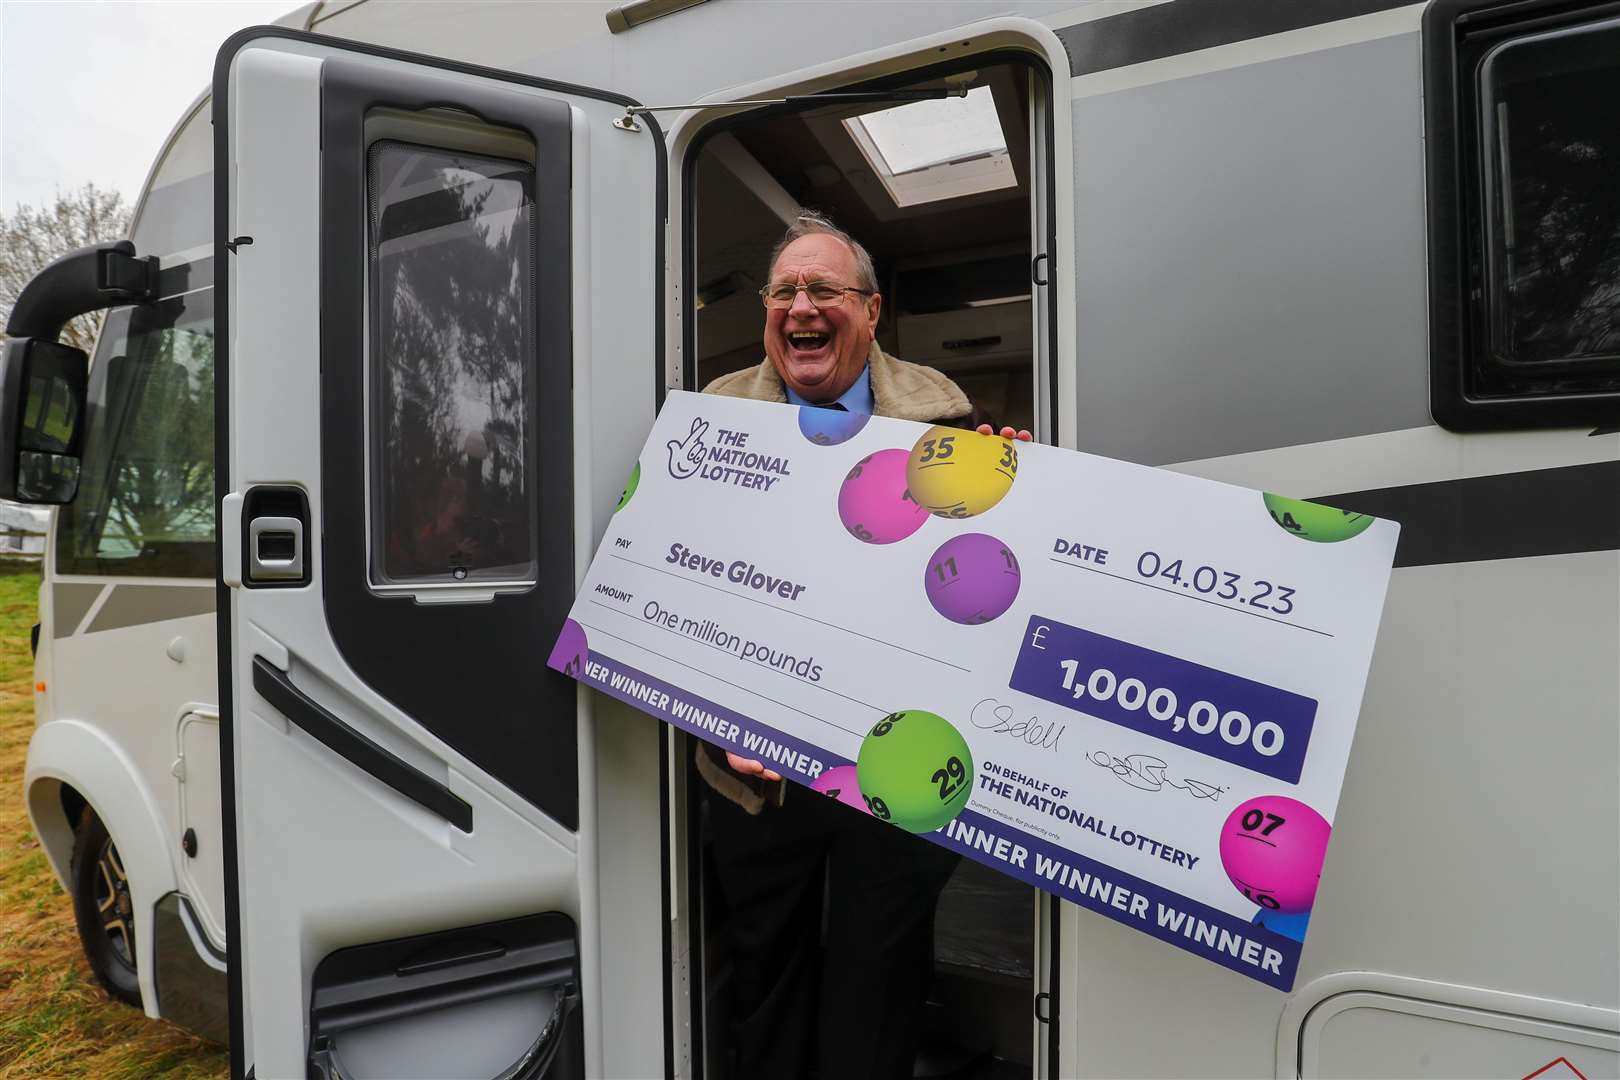 He has already bought the motorhome ready to take to the road (Martin Bennett/National Lottery/PA)